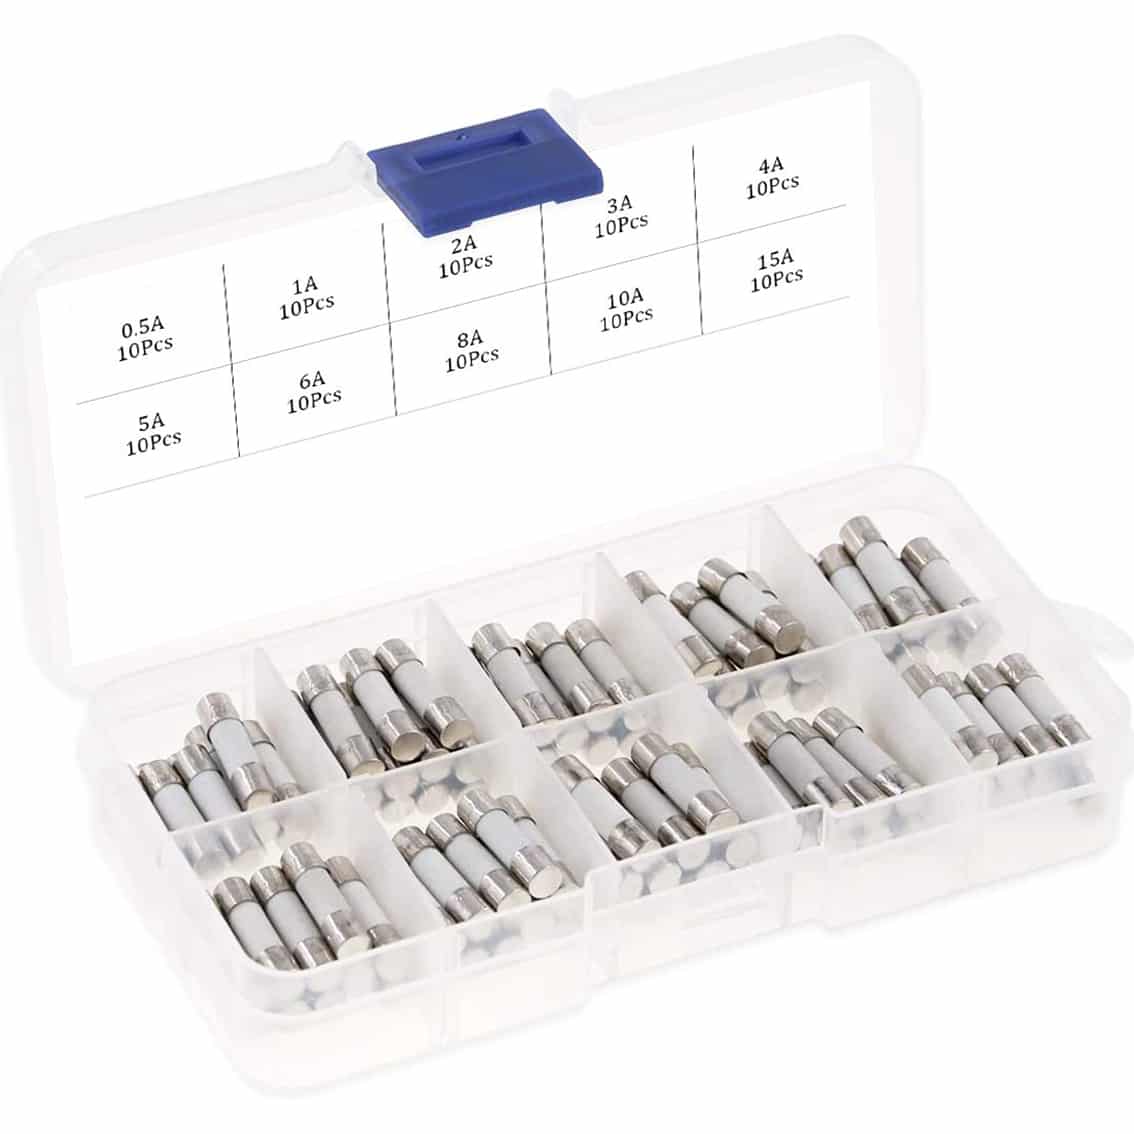 Ceramic Slow Blow Fuse 100 Piece Assortment Pack with Case - 5mm x 20mm